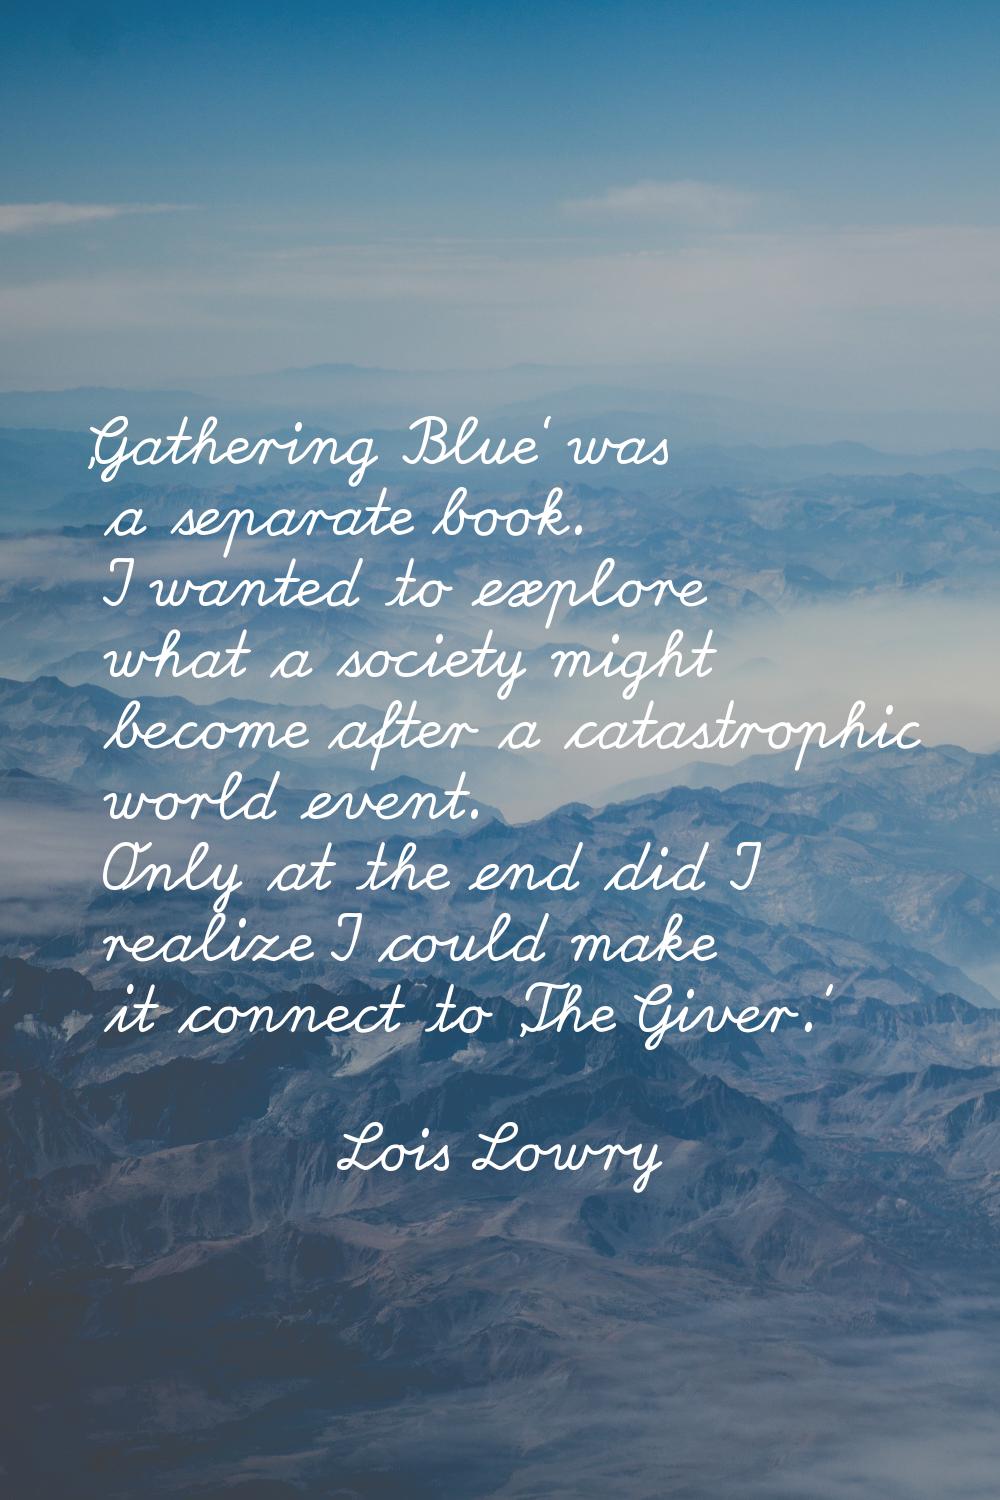 'Gathering Blue' was a separate book. I wanted to explore what a society might become after a catas